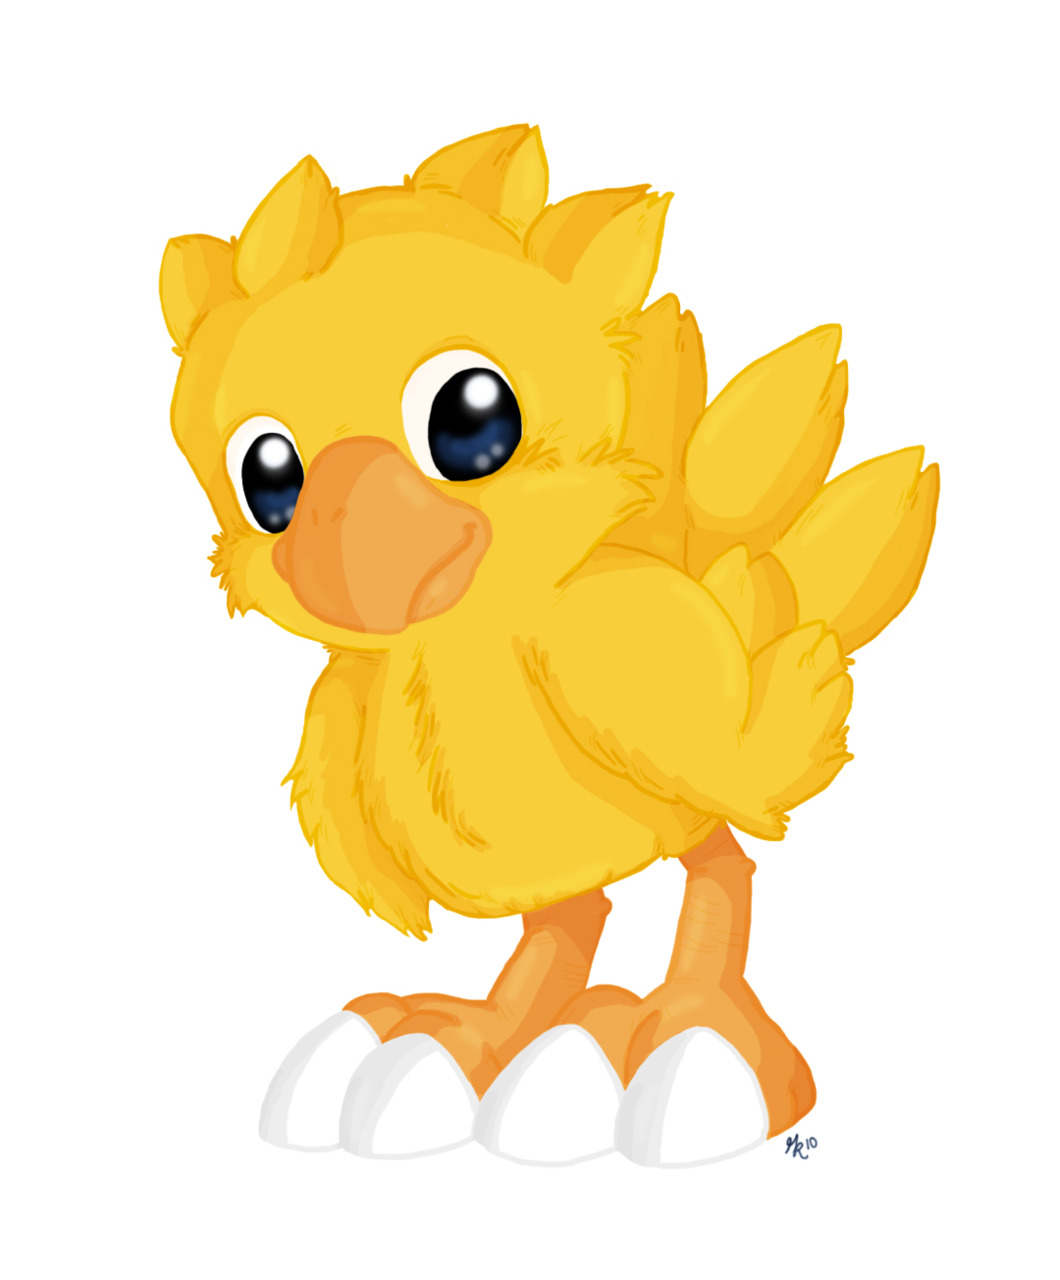 Chocobo by gillustrations